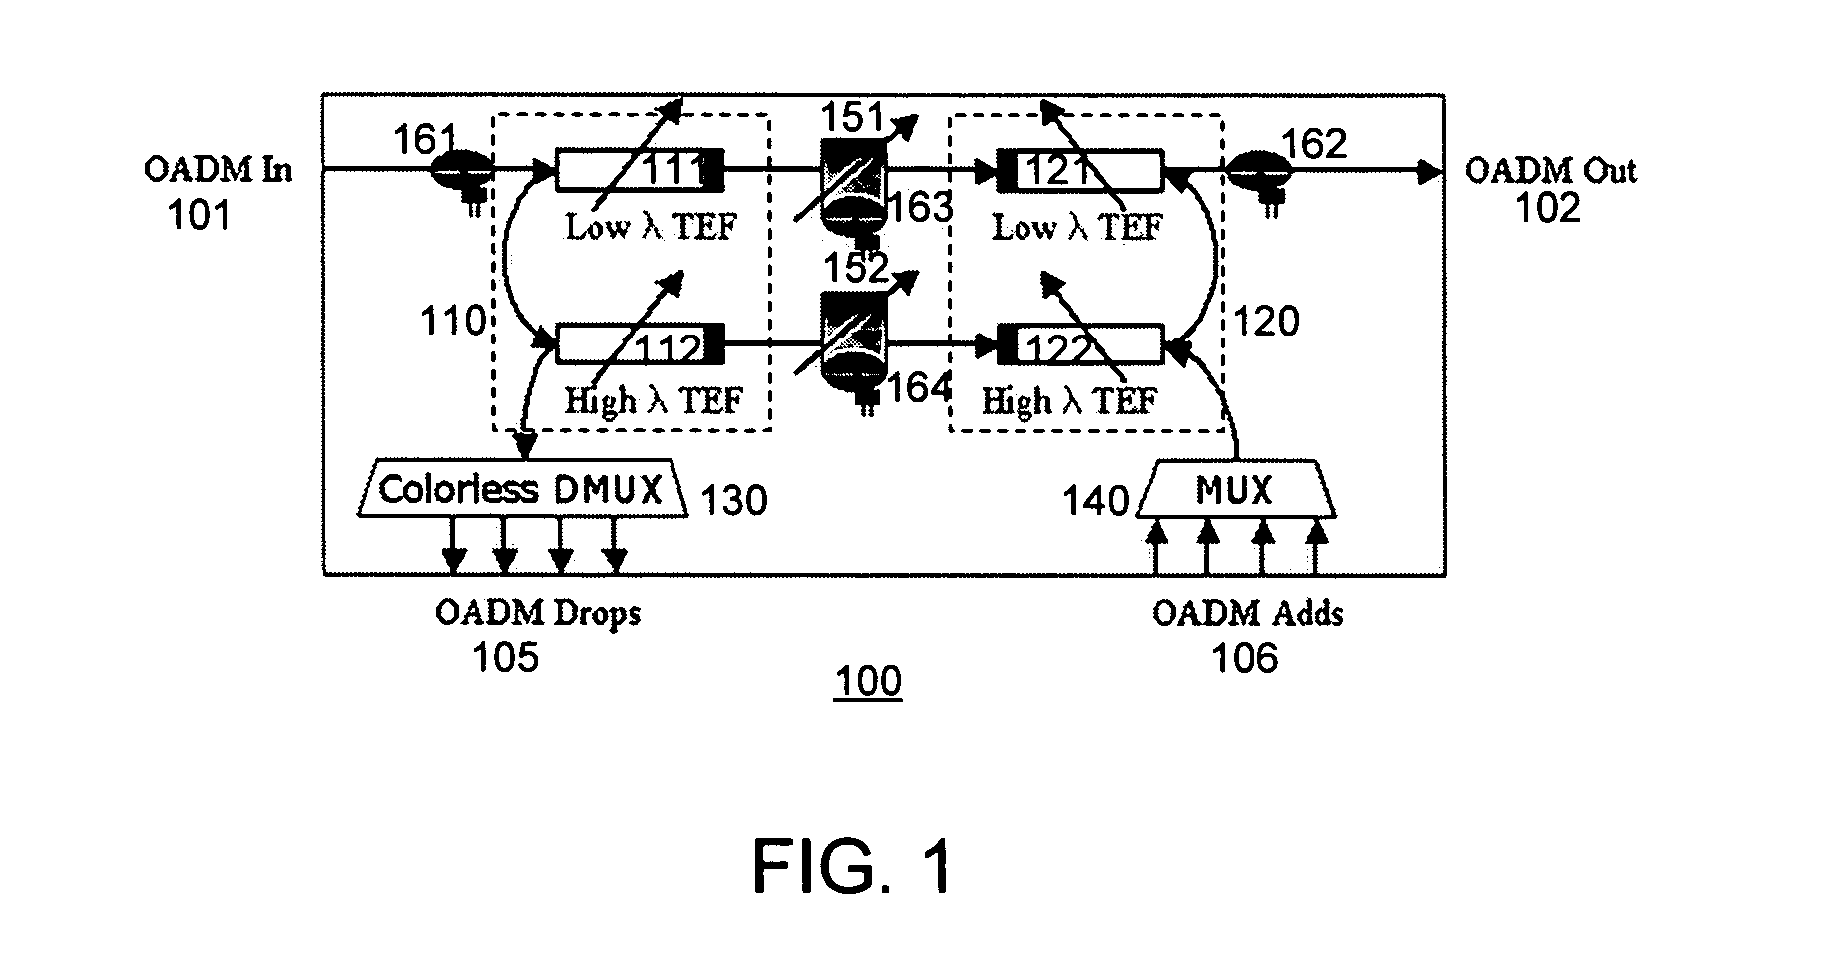 Flexible band tunable add/drop multiplexer and modular optical node architecture